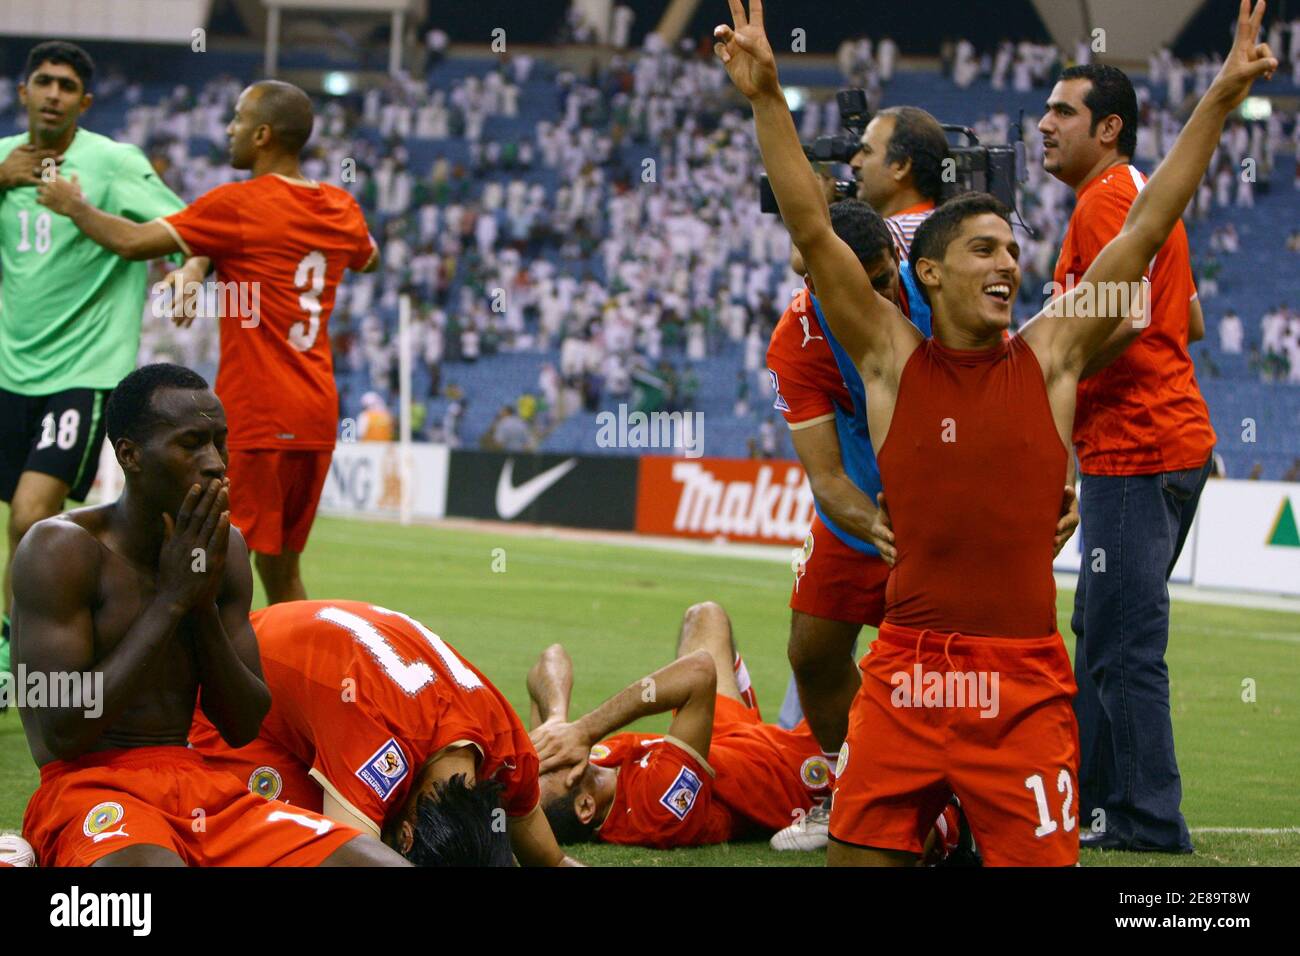 Bahrain's players celebrate at the end of their World Cup 2010 qualifying soccer match against Saudi Arabia in Riyadh, September 9, 2009. REUTERS/Fahad Shadeed    (SAUDI ARABIA SPORT SOCCER IMAGES OF THE DAY) Stock Photo